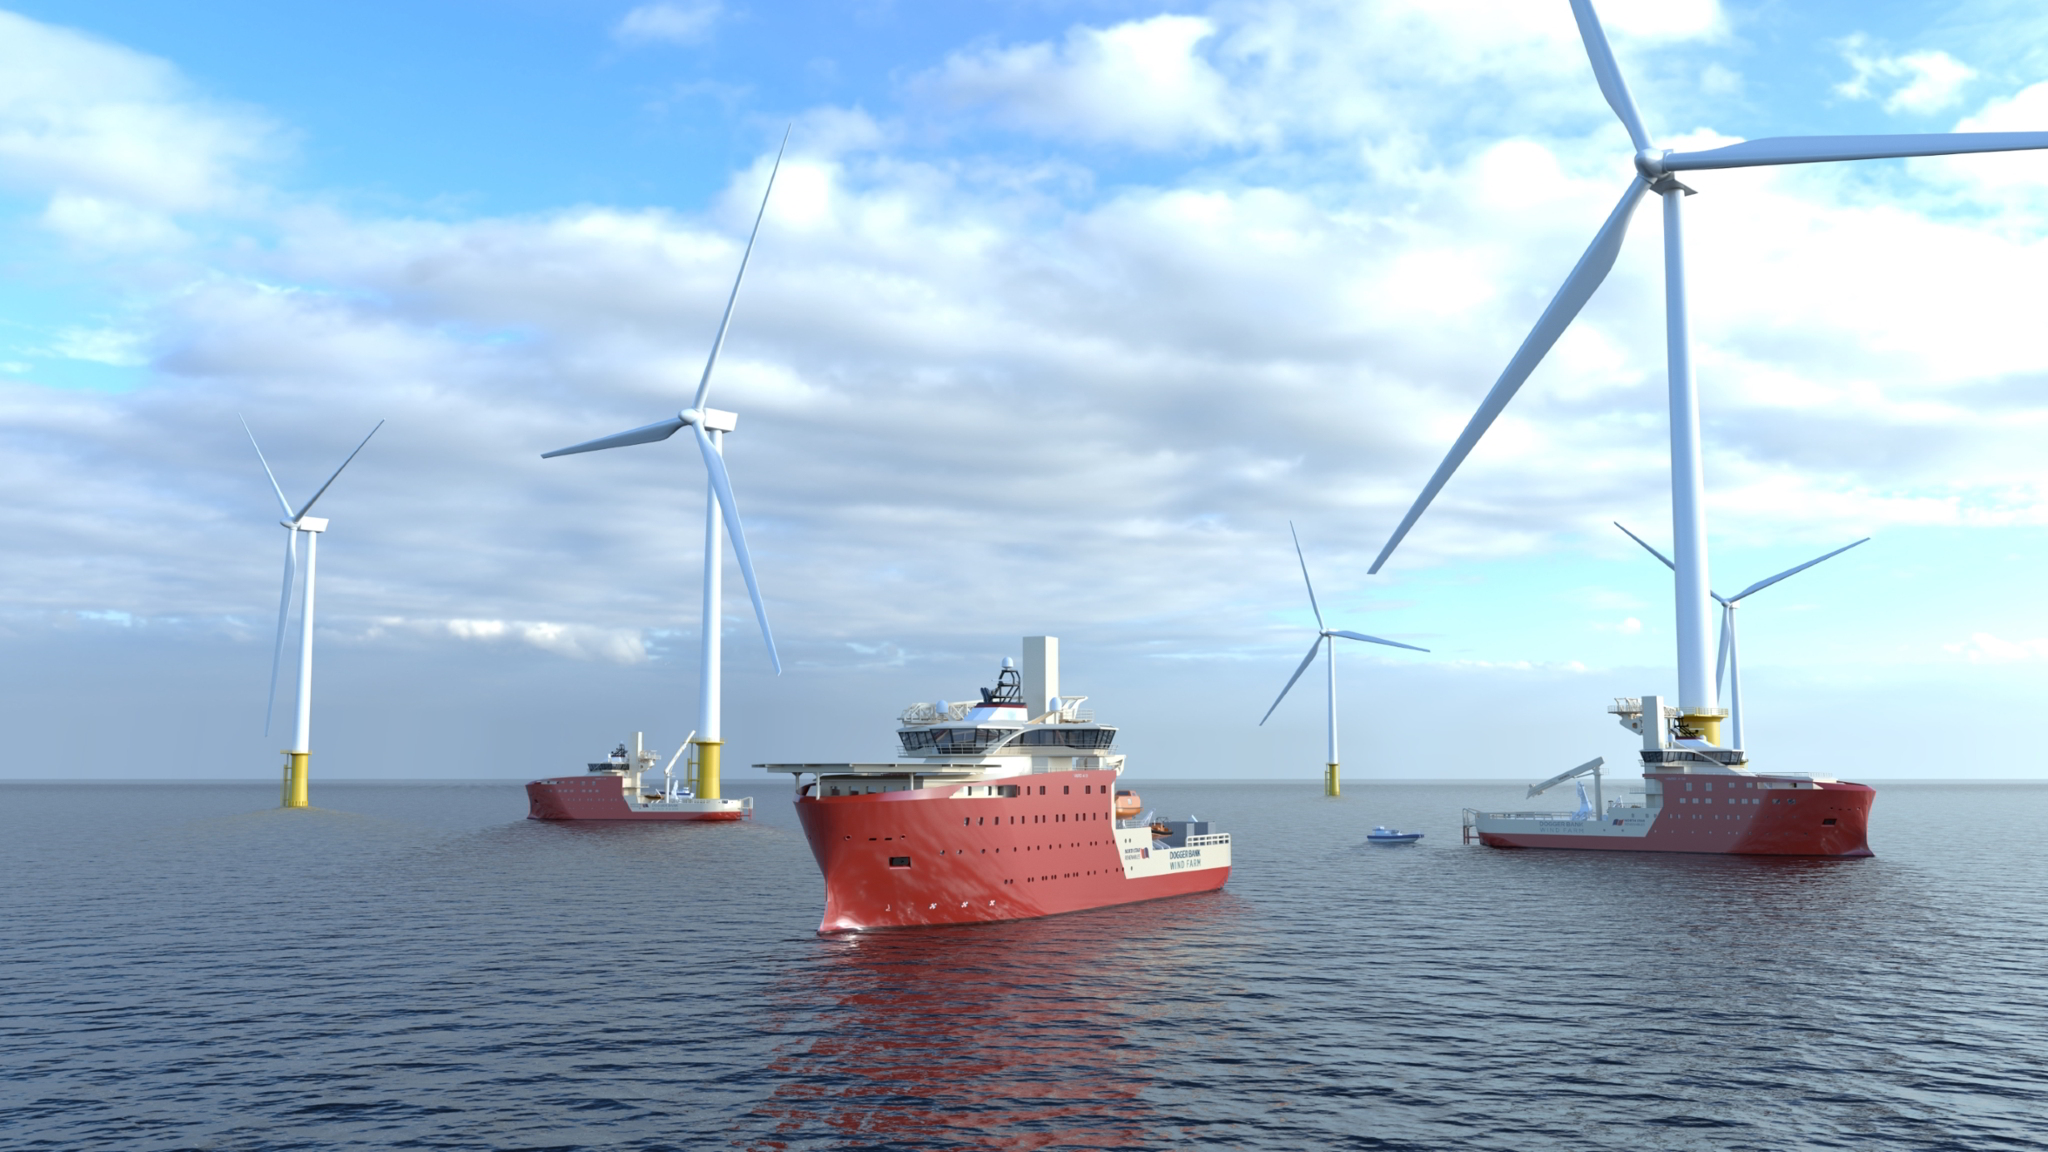 VARD 4 19 and VARD 4 12 Service Operation Vessels (SOVs) for North Star Renewables